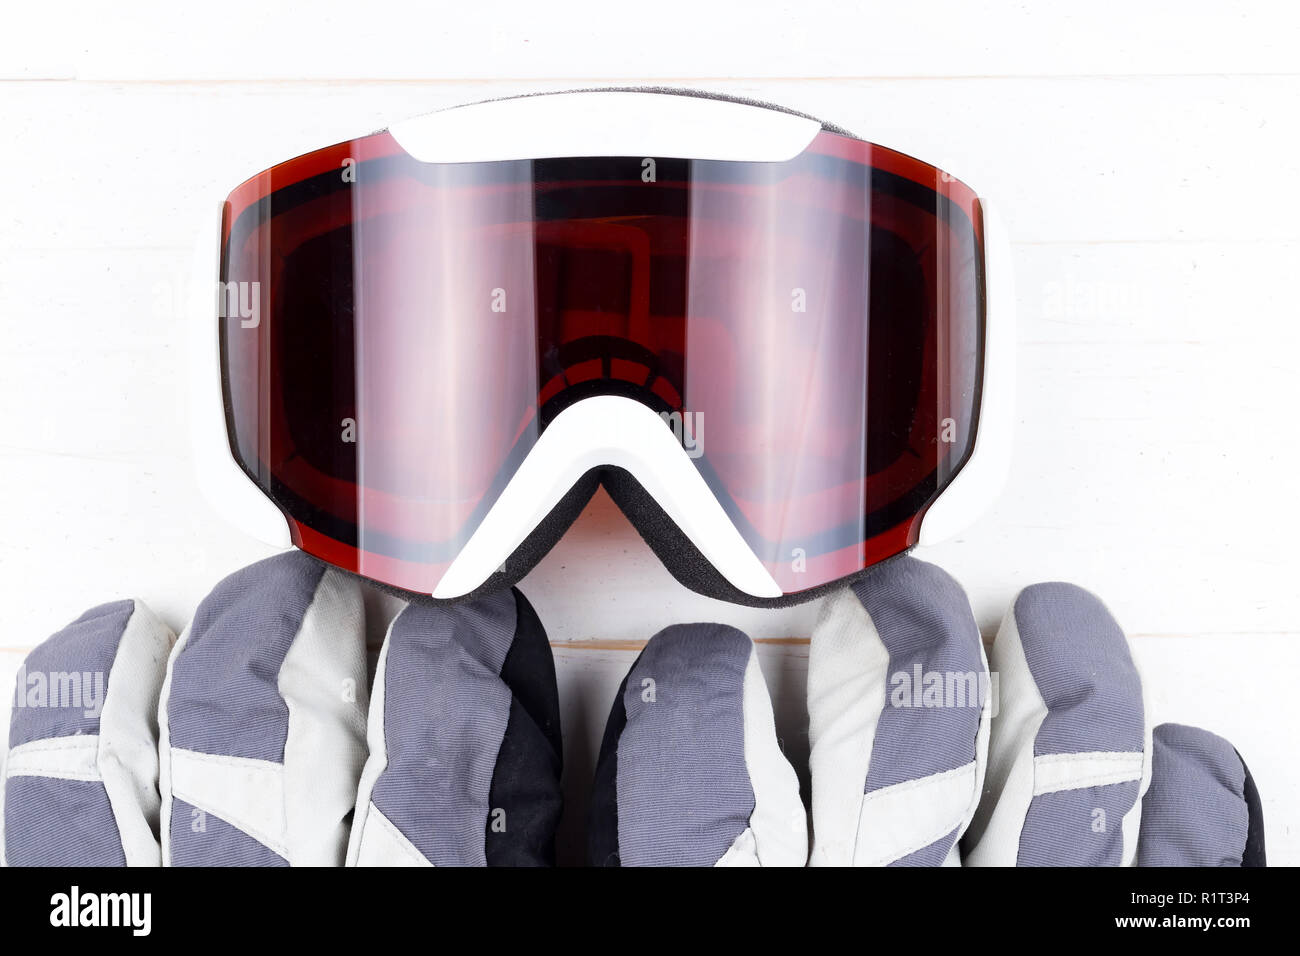 Winter gloves and goggles on white natural wooden table background. Concept of skiing or snowboarding. Flat lay top view. Stock Photo